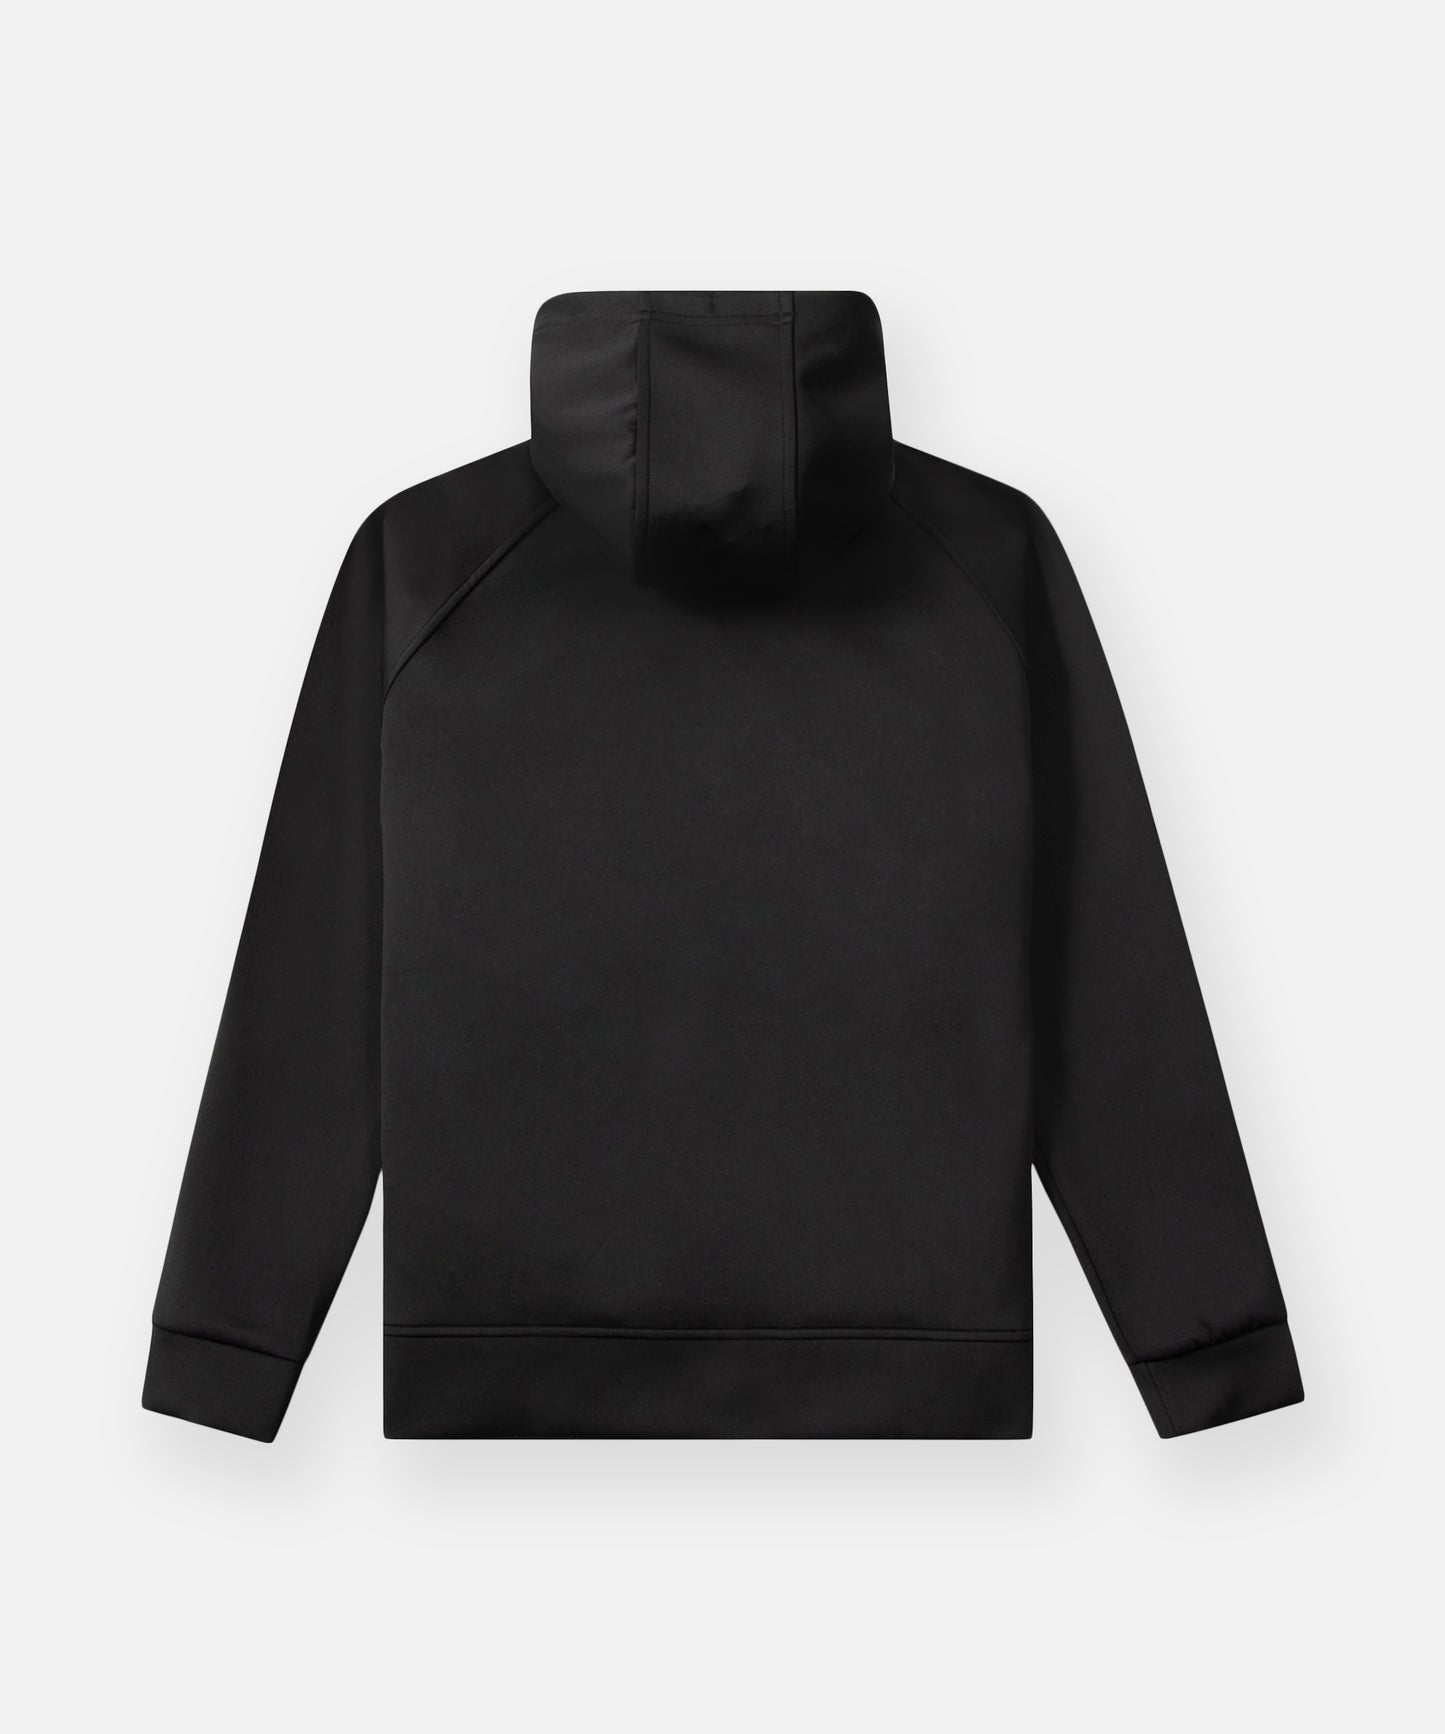 CUSTOM_ALT_TEXT: Back of Paper Planes Greatness Is a Process Zip-Up Hoodie, color Black.